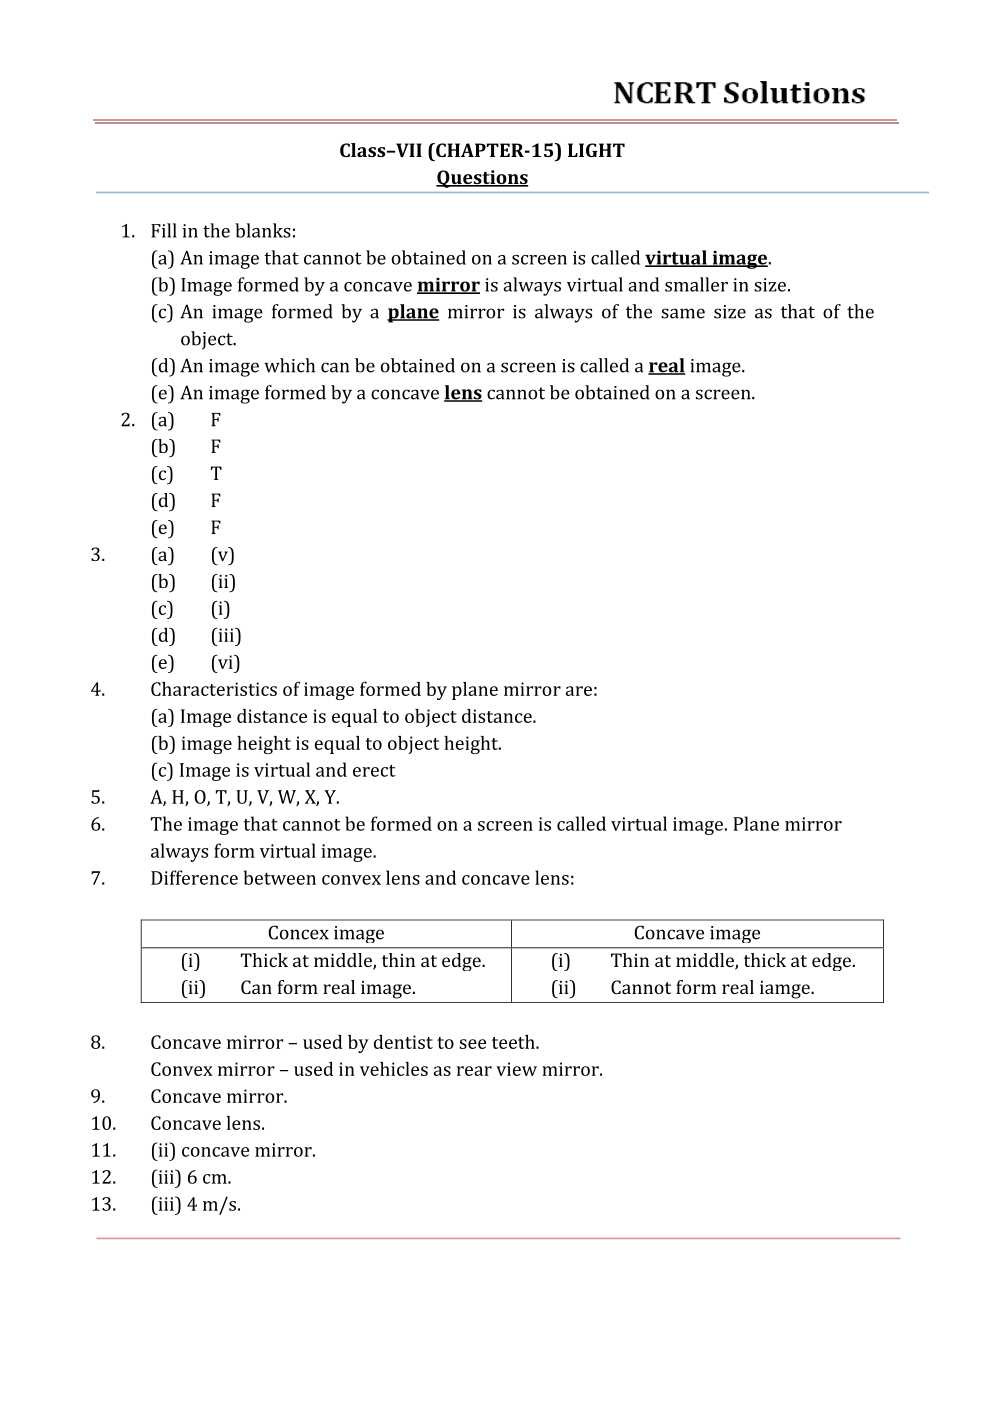 NCERT Solutions For Class 7 science Chapter 15 Light